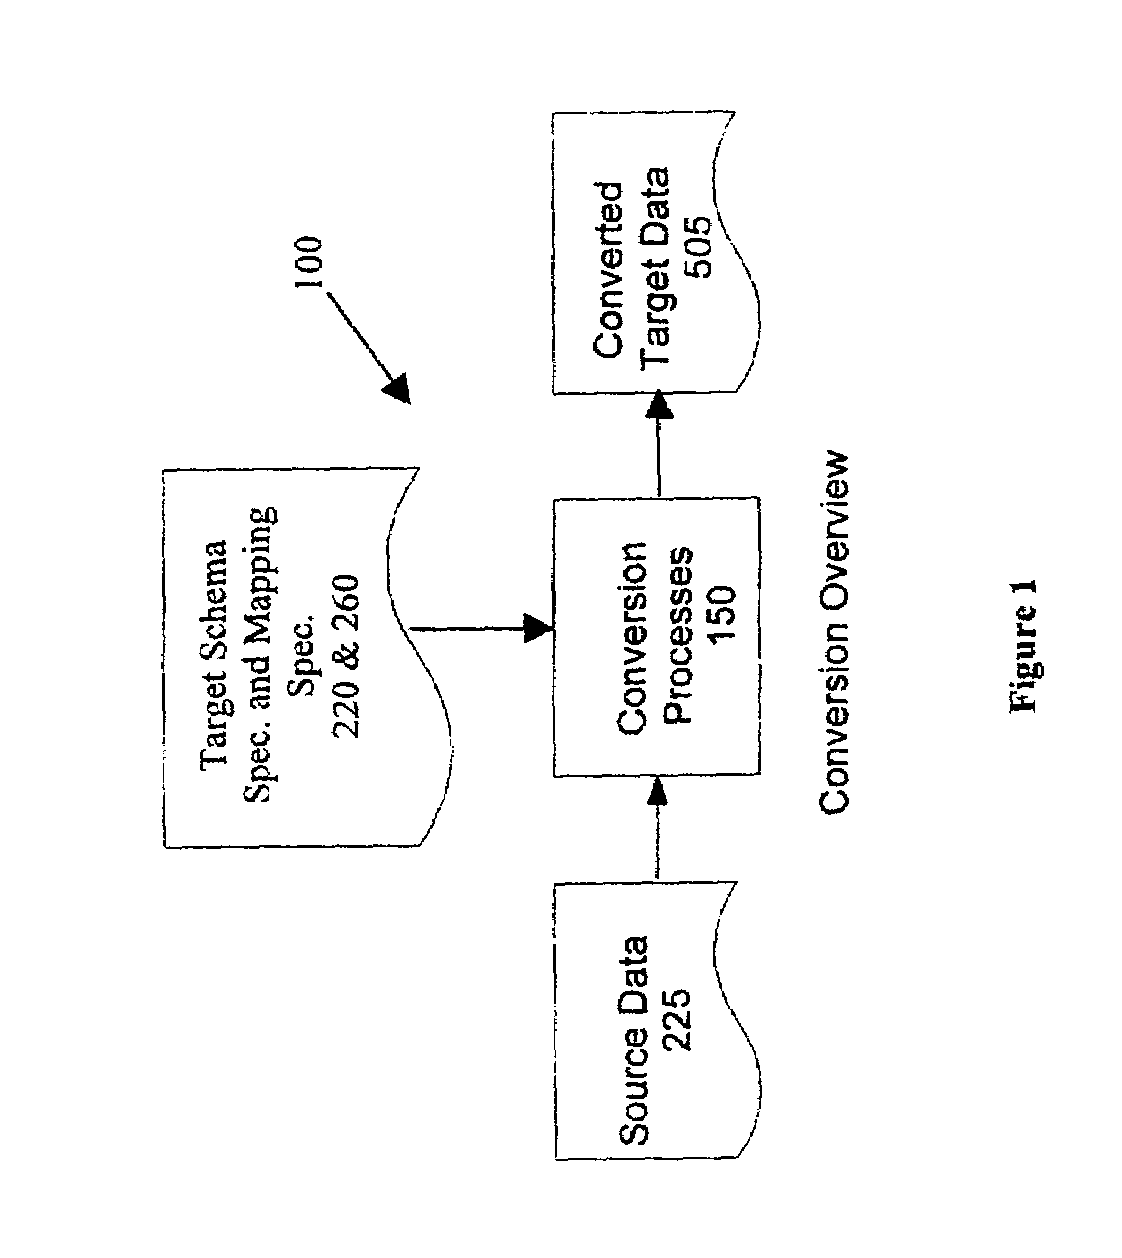 System and method for database conversion